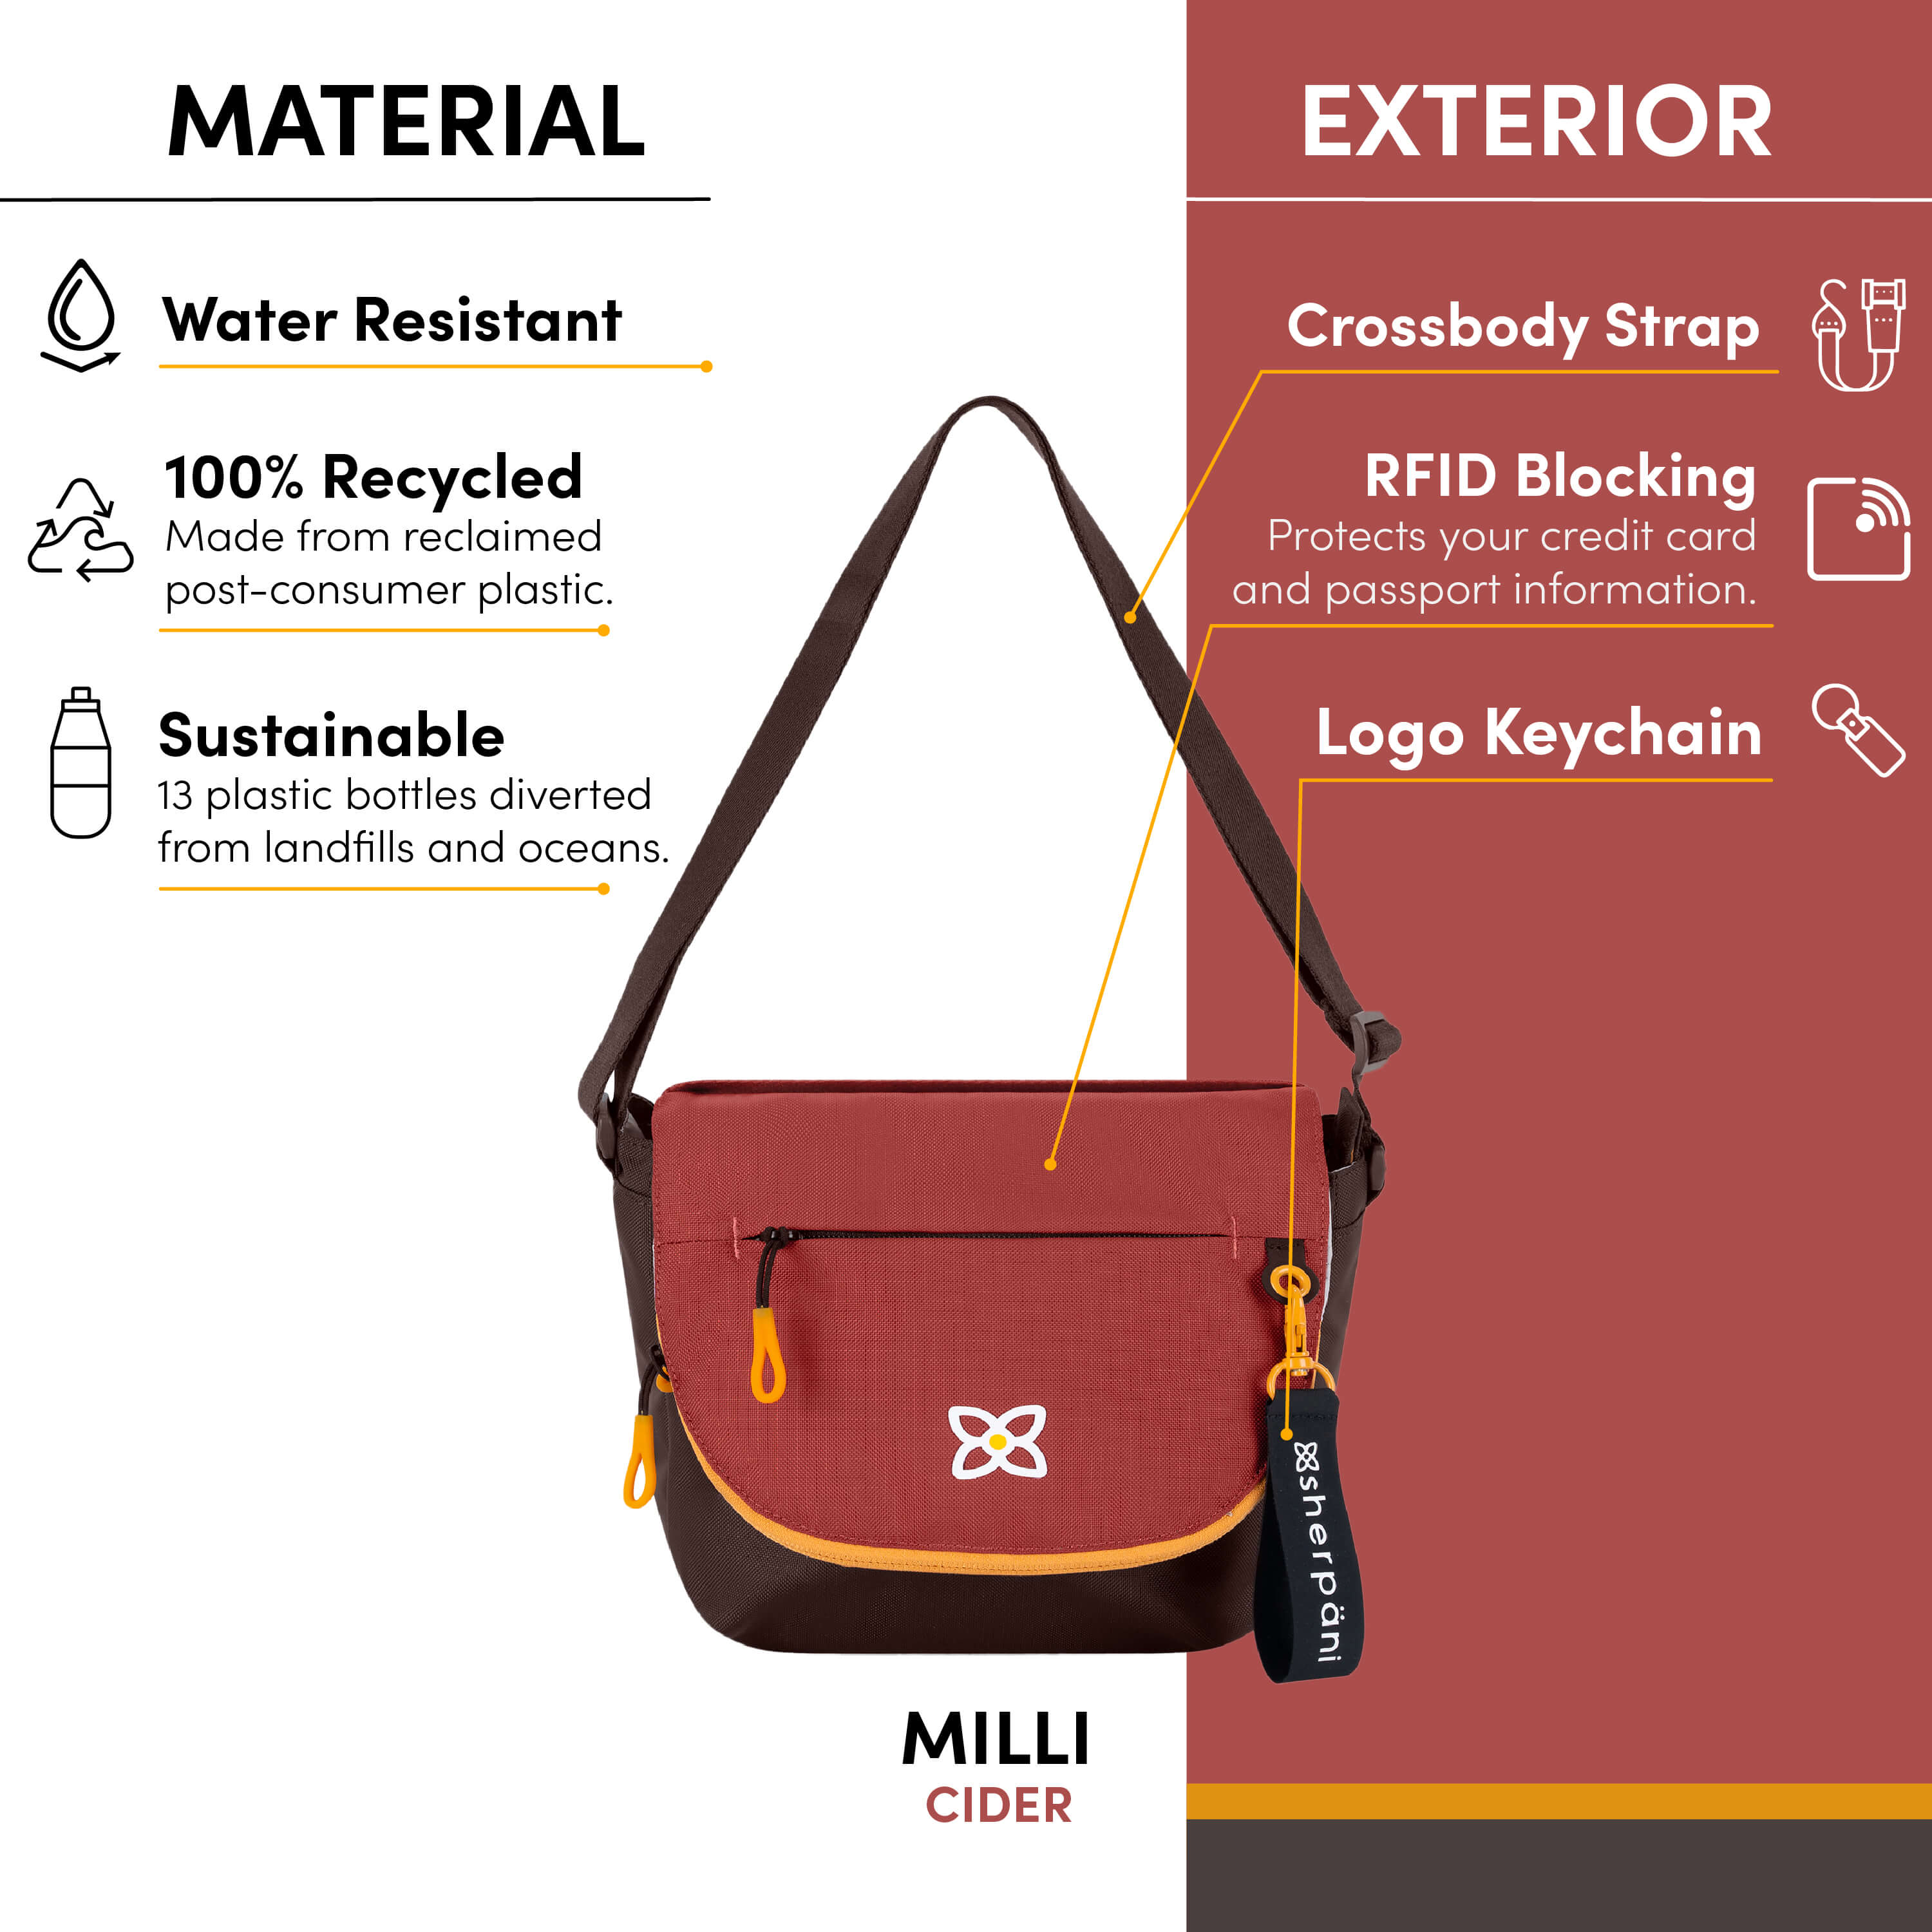 Graphic showcasing the special features of Sherpani classic messenger bag, the Milli. Features include water-resistant material, made from recycled materials, adjustable crossbody strap, RFID protected, Sherpani logo keychain. 